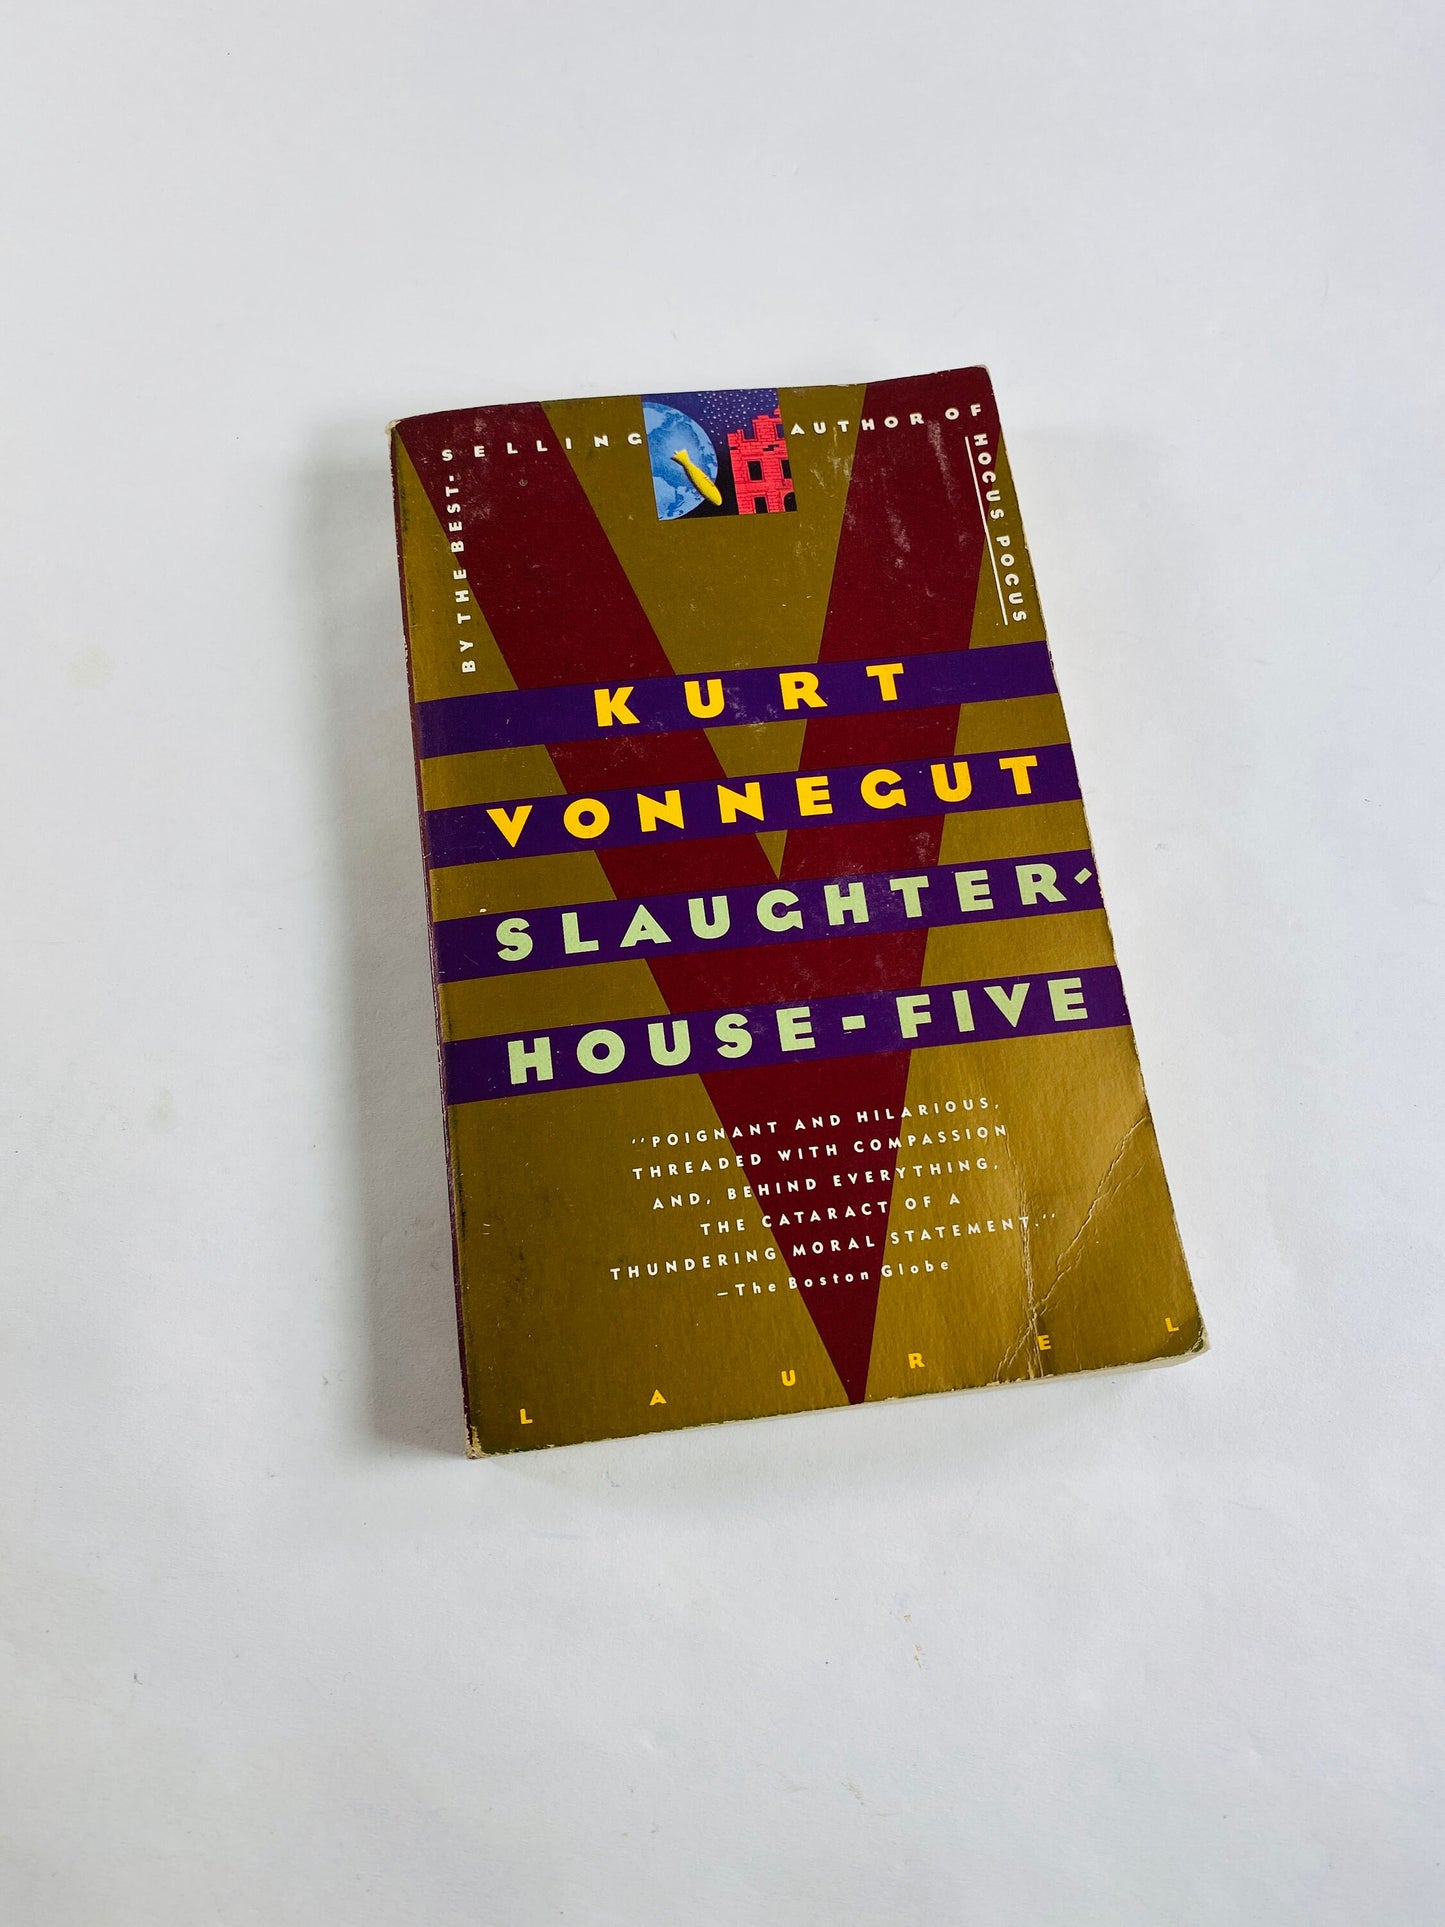 Kurt Vonnegut Slaughterhouse-Five vintage paperback book circa 1991 reminding us how to see the truth.